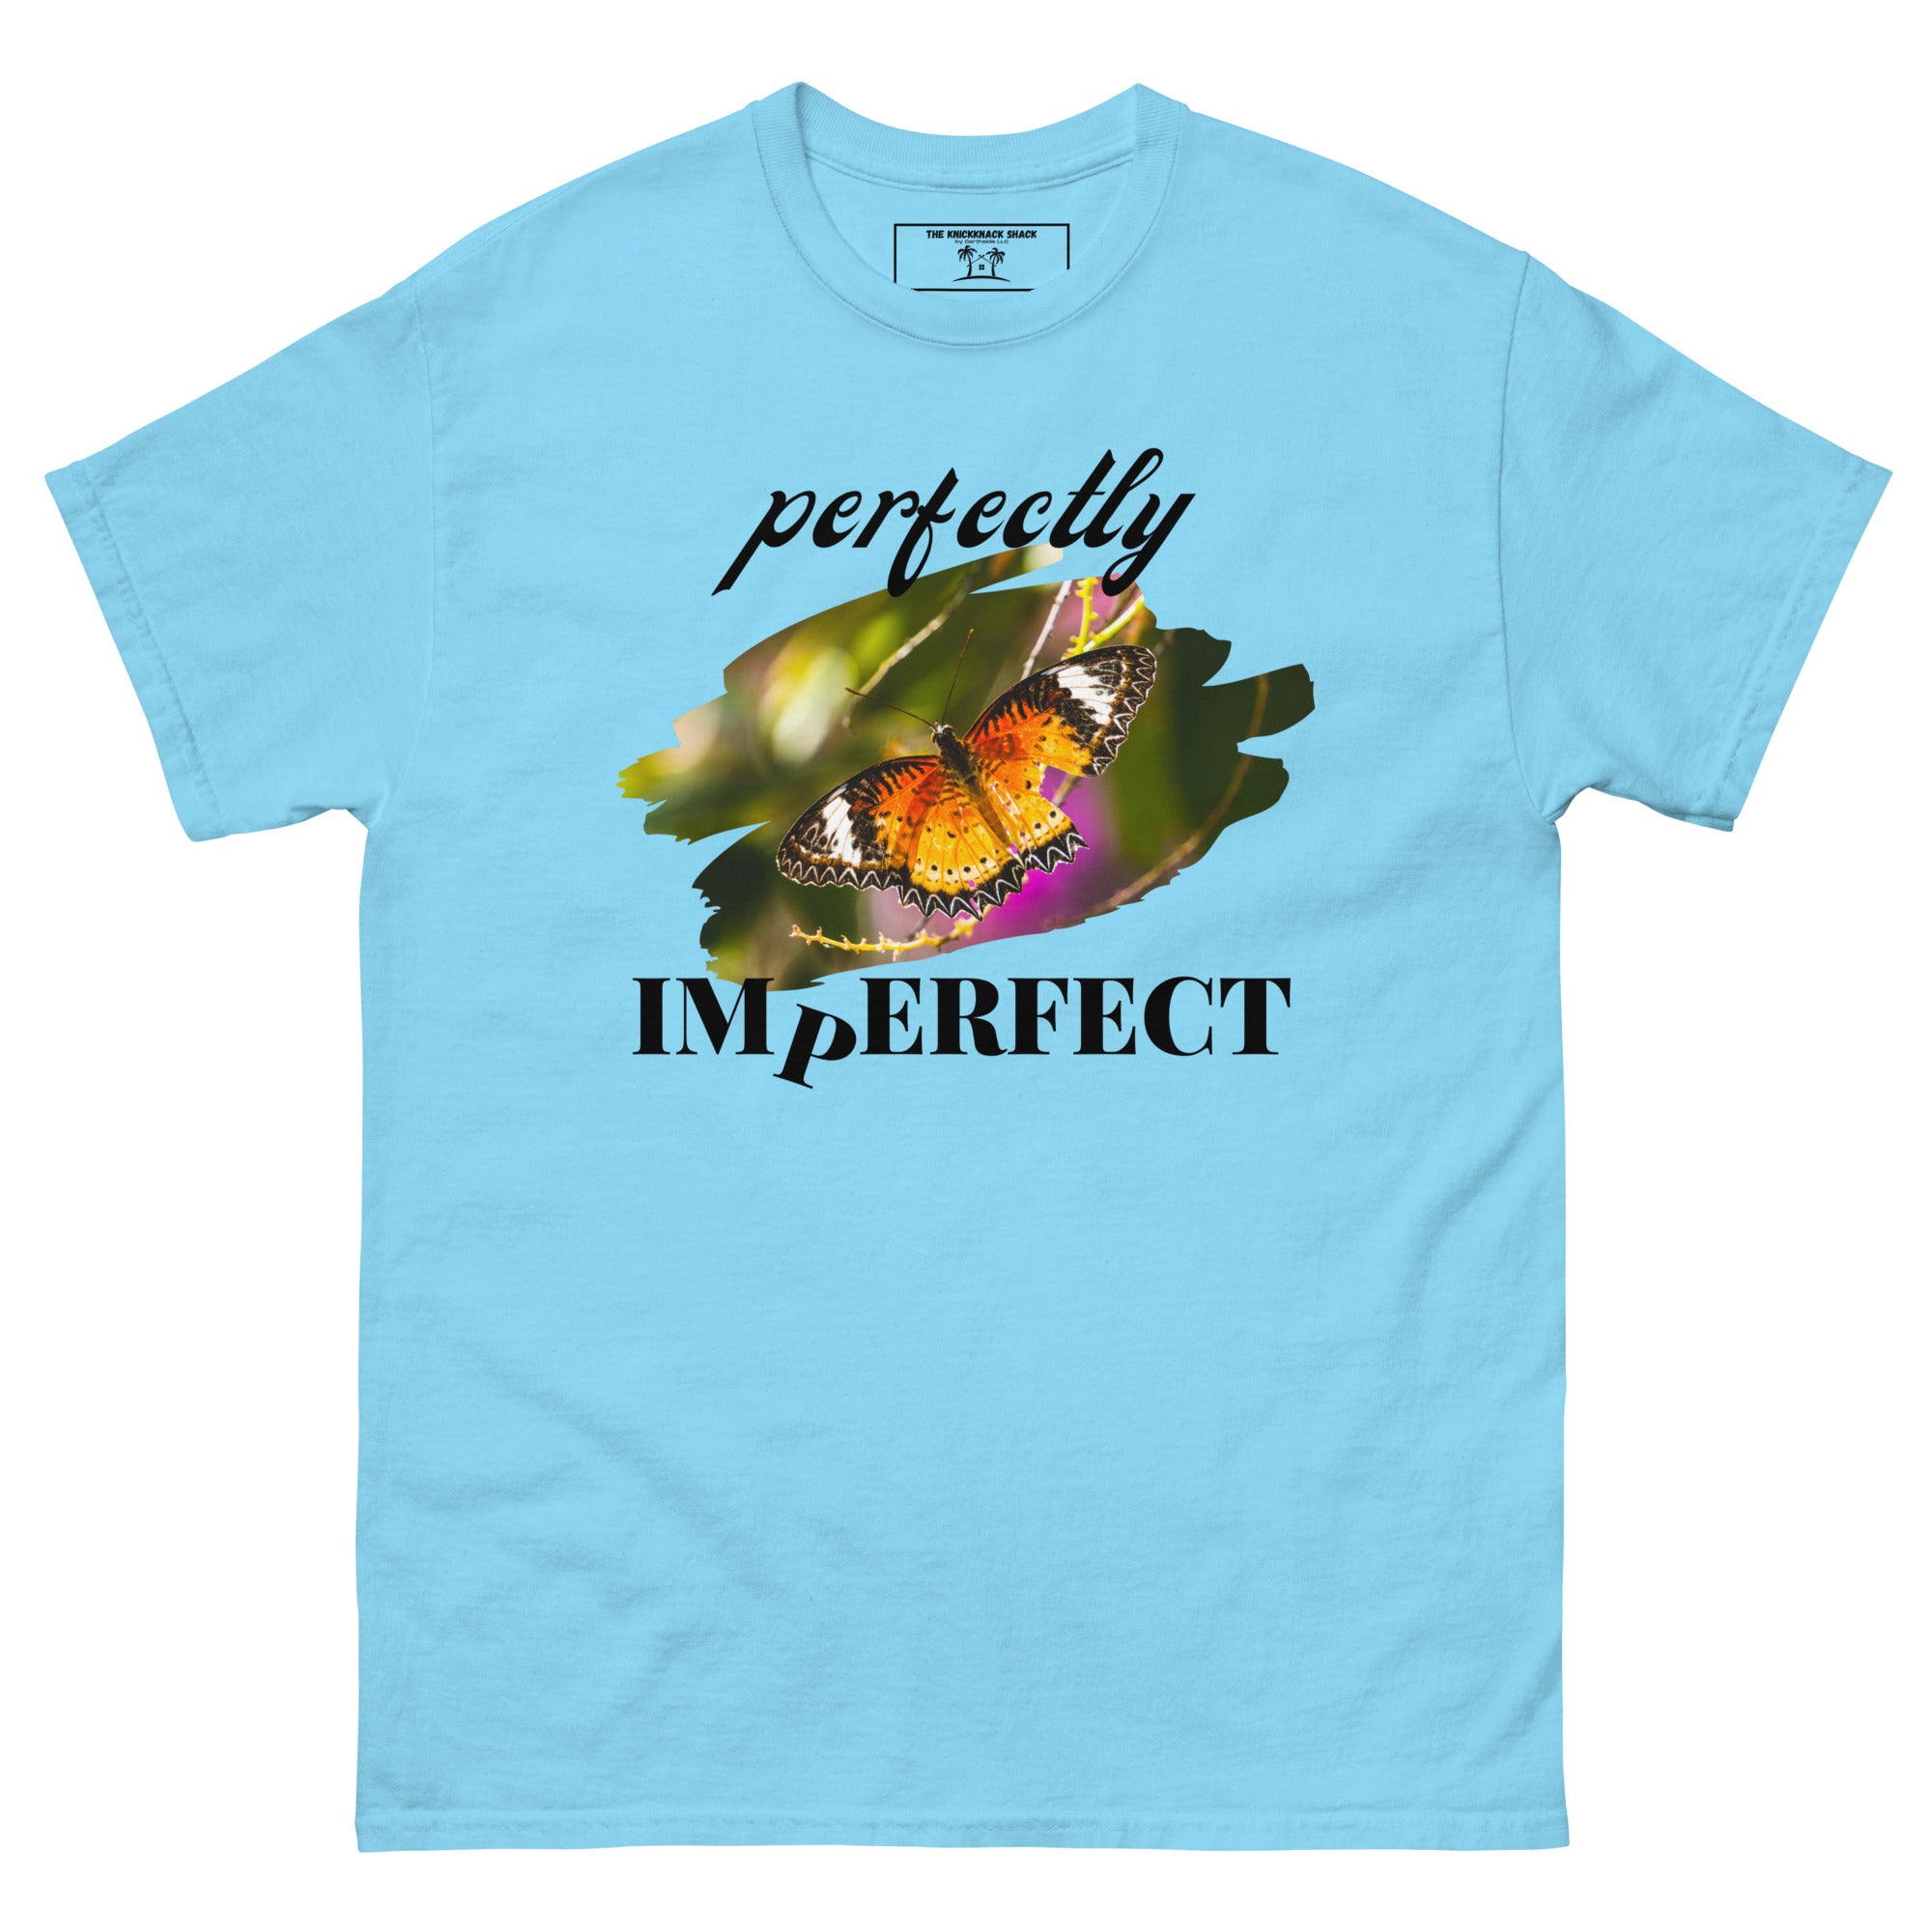 Classic Tee - Perfectly Imperfect (Style 2) (Light Colors)